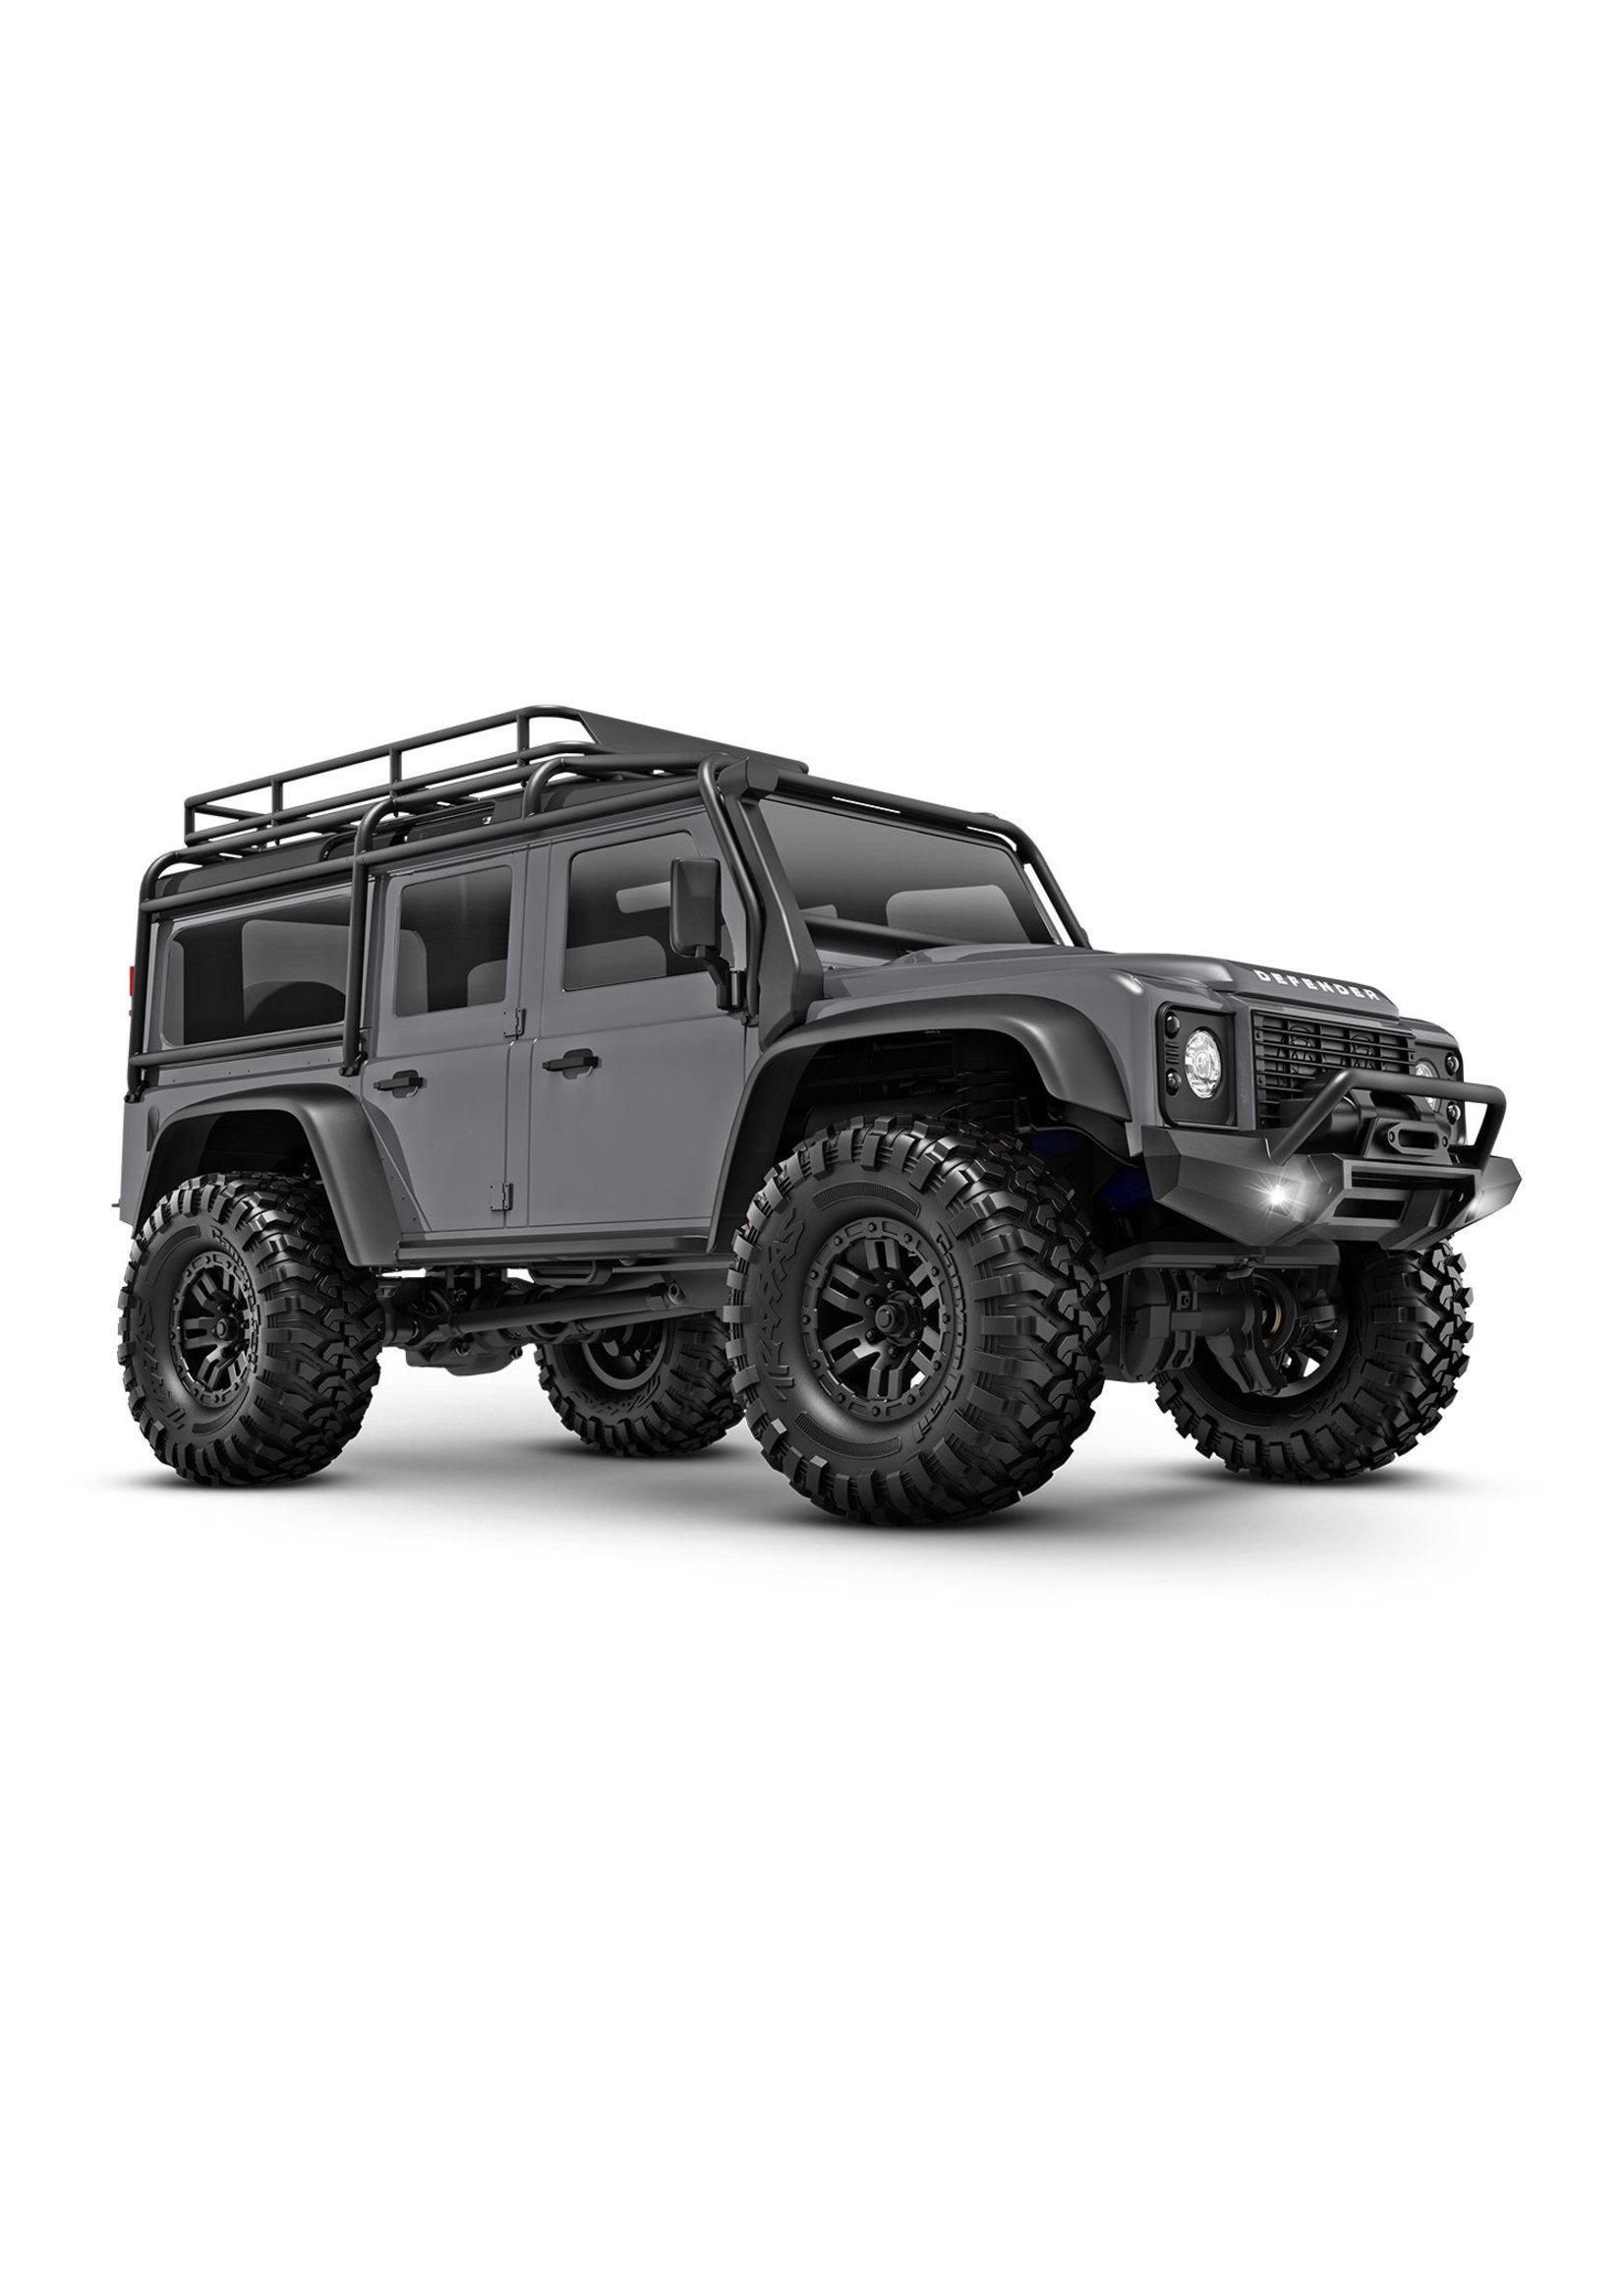 Traxxas 970541SLVR - 1/18 RTR Scale and Trail Defender - Silver